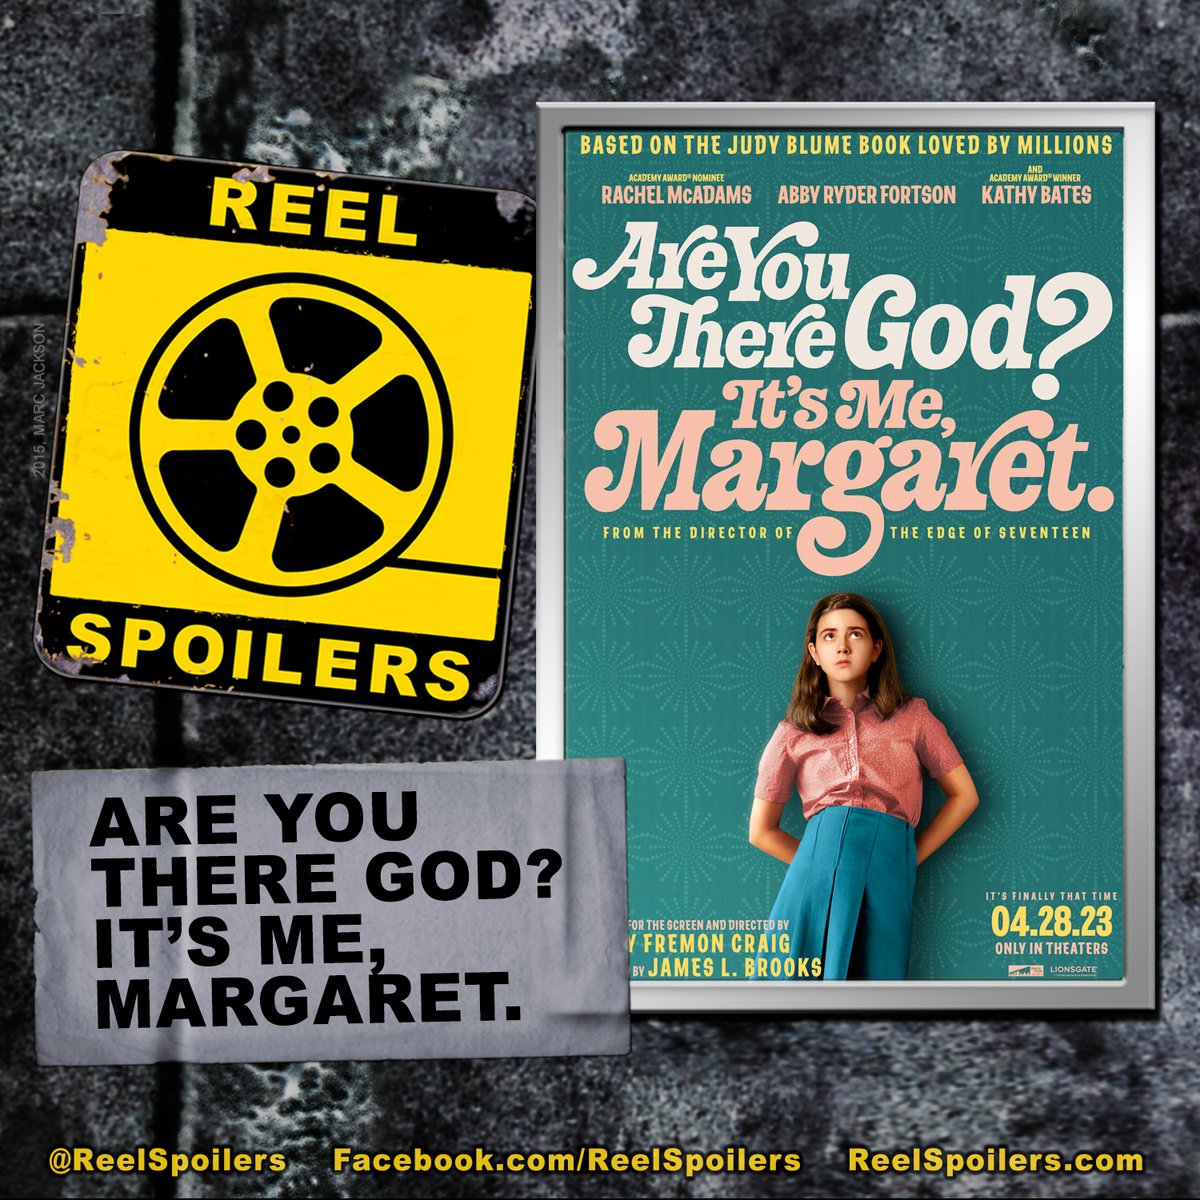 New on @ReelSpoilers, we are joined by @rachel_reviews to discuss the film adaptation of Judy Blume's beloved 1970 novel #AreYouThereGodItsMeMargaret Have you seen it? #JudyBlume #adaptation Watch: bit.ly/MargaretReview Listen: bit.ly/AreYouTherePod